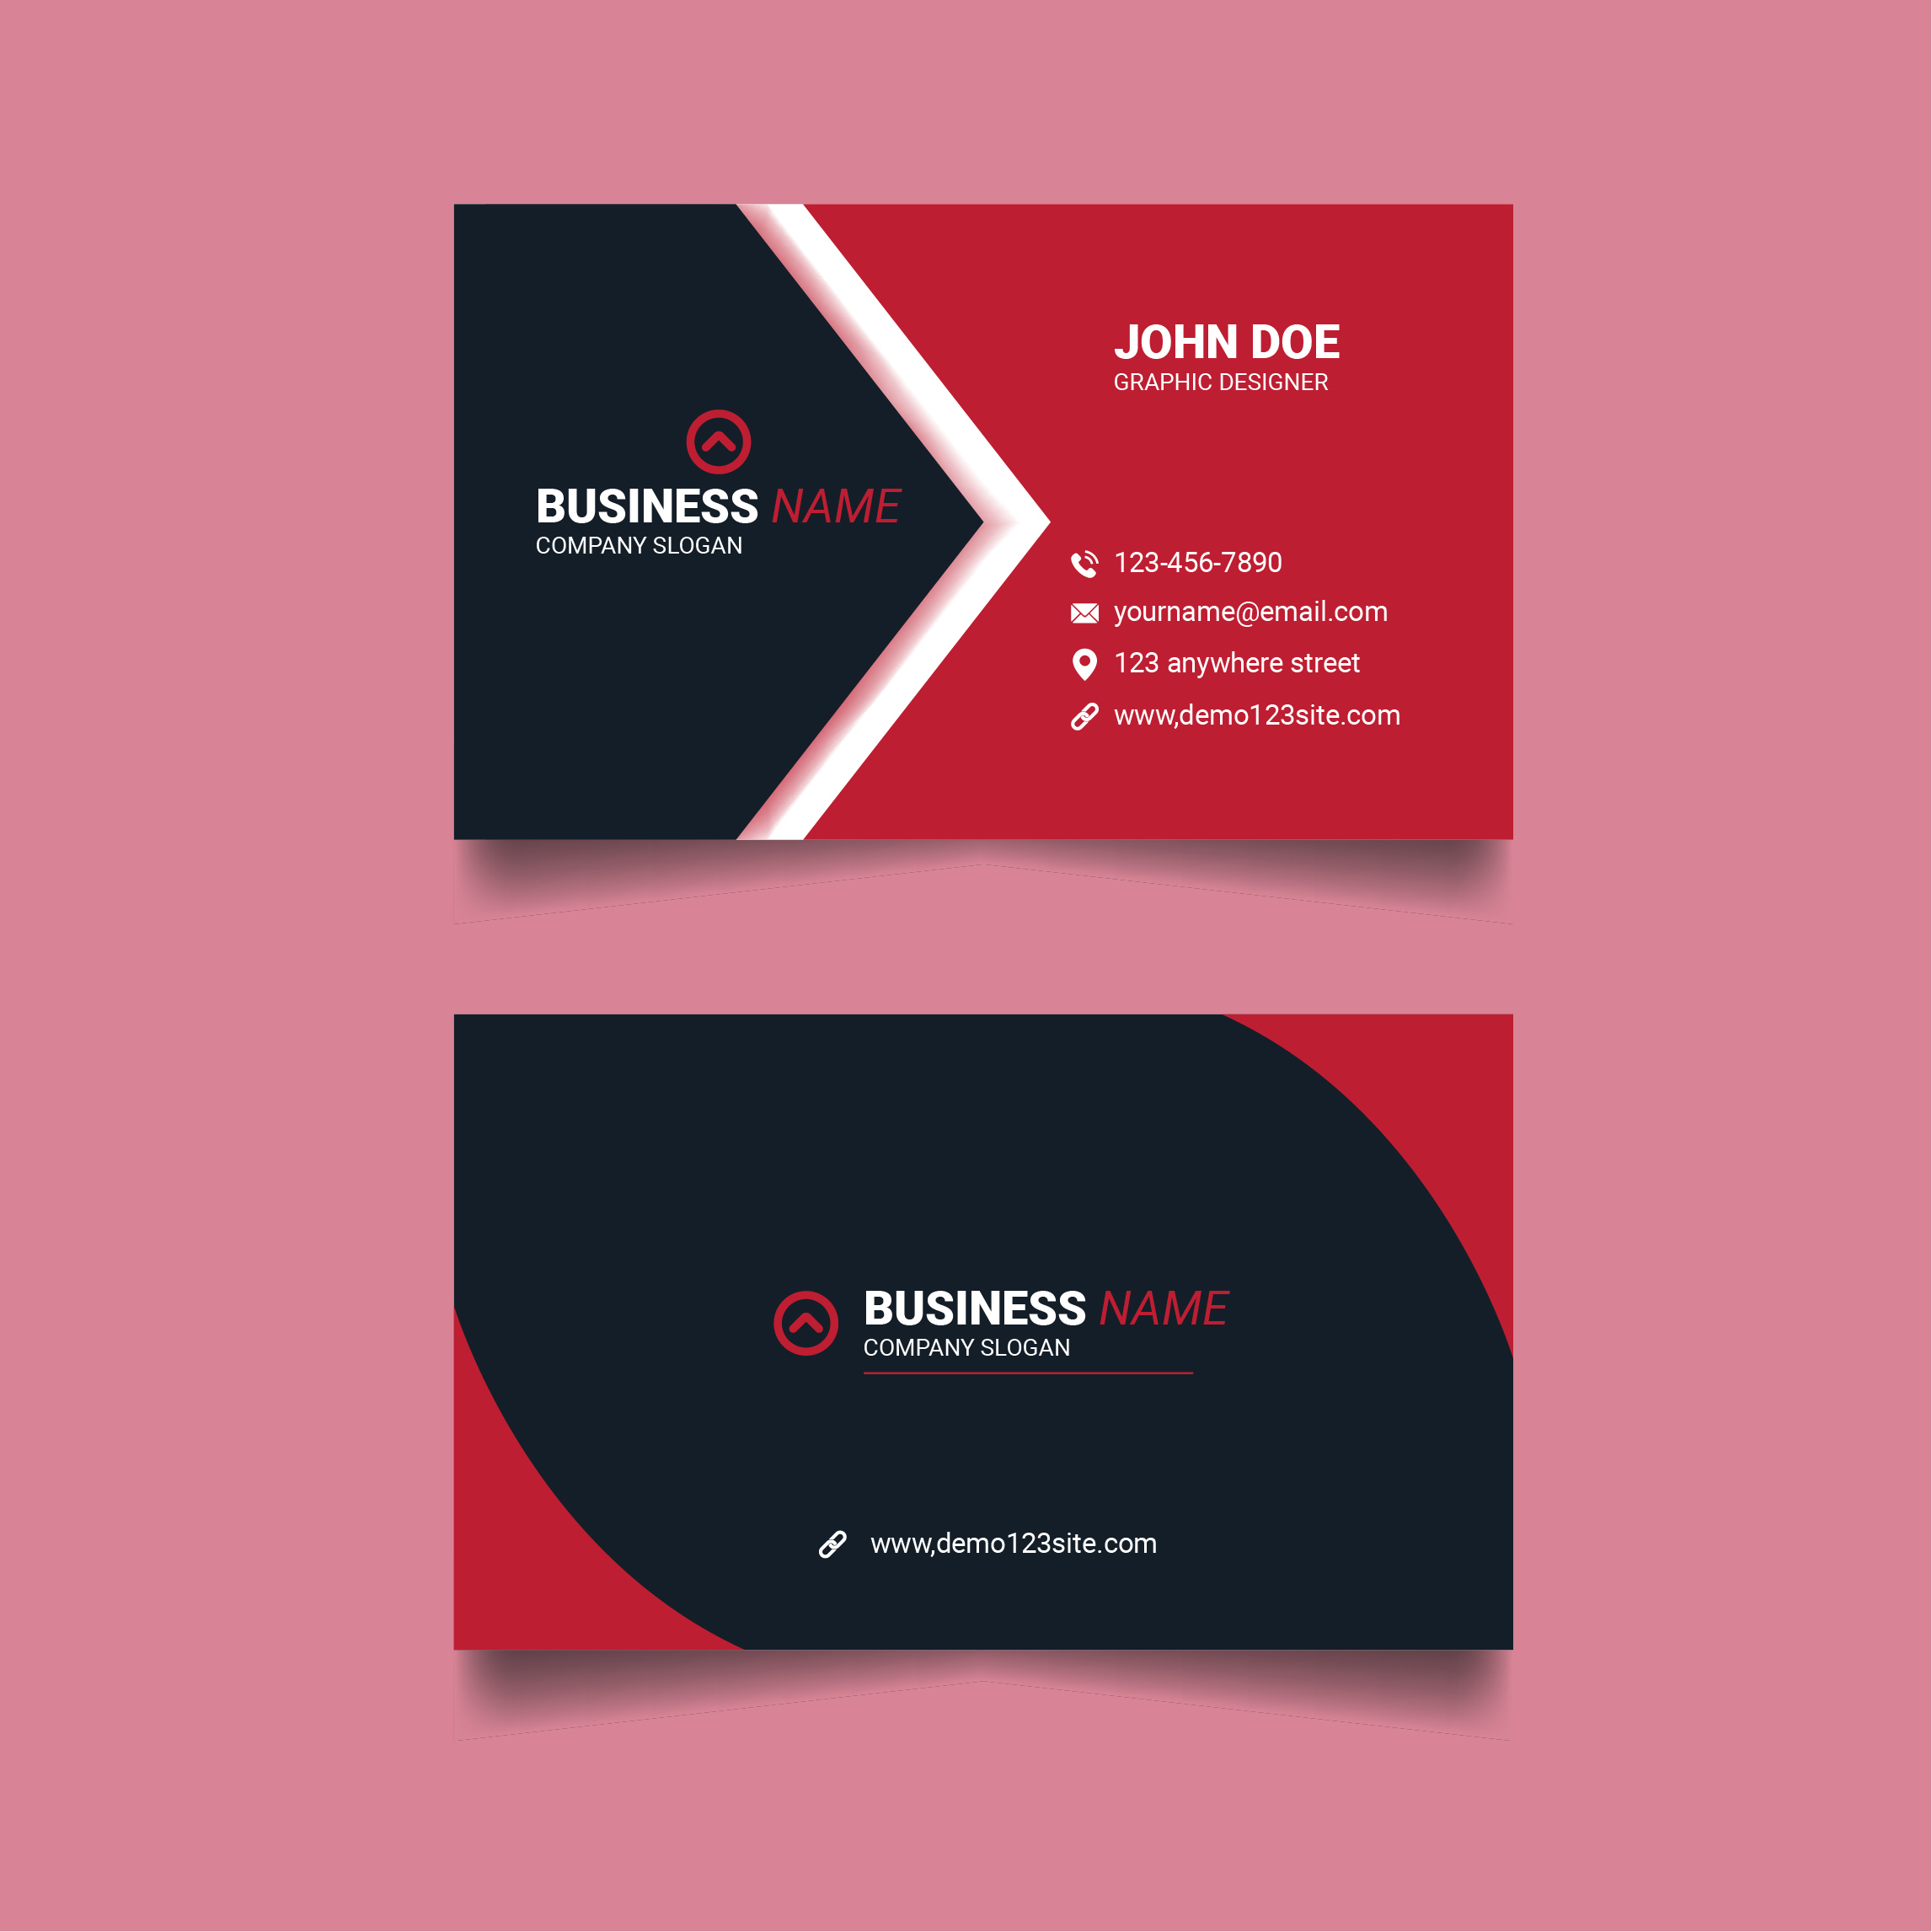 Professional Black and Red Corporate Modern Business Card Template Design cover image.